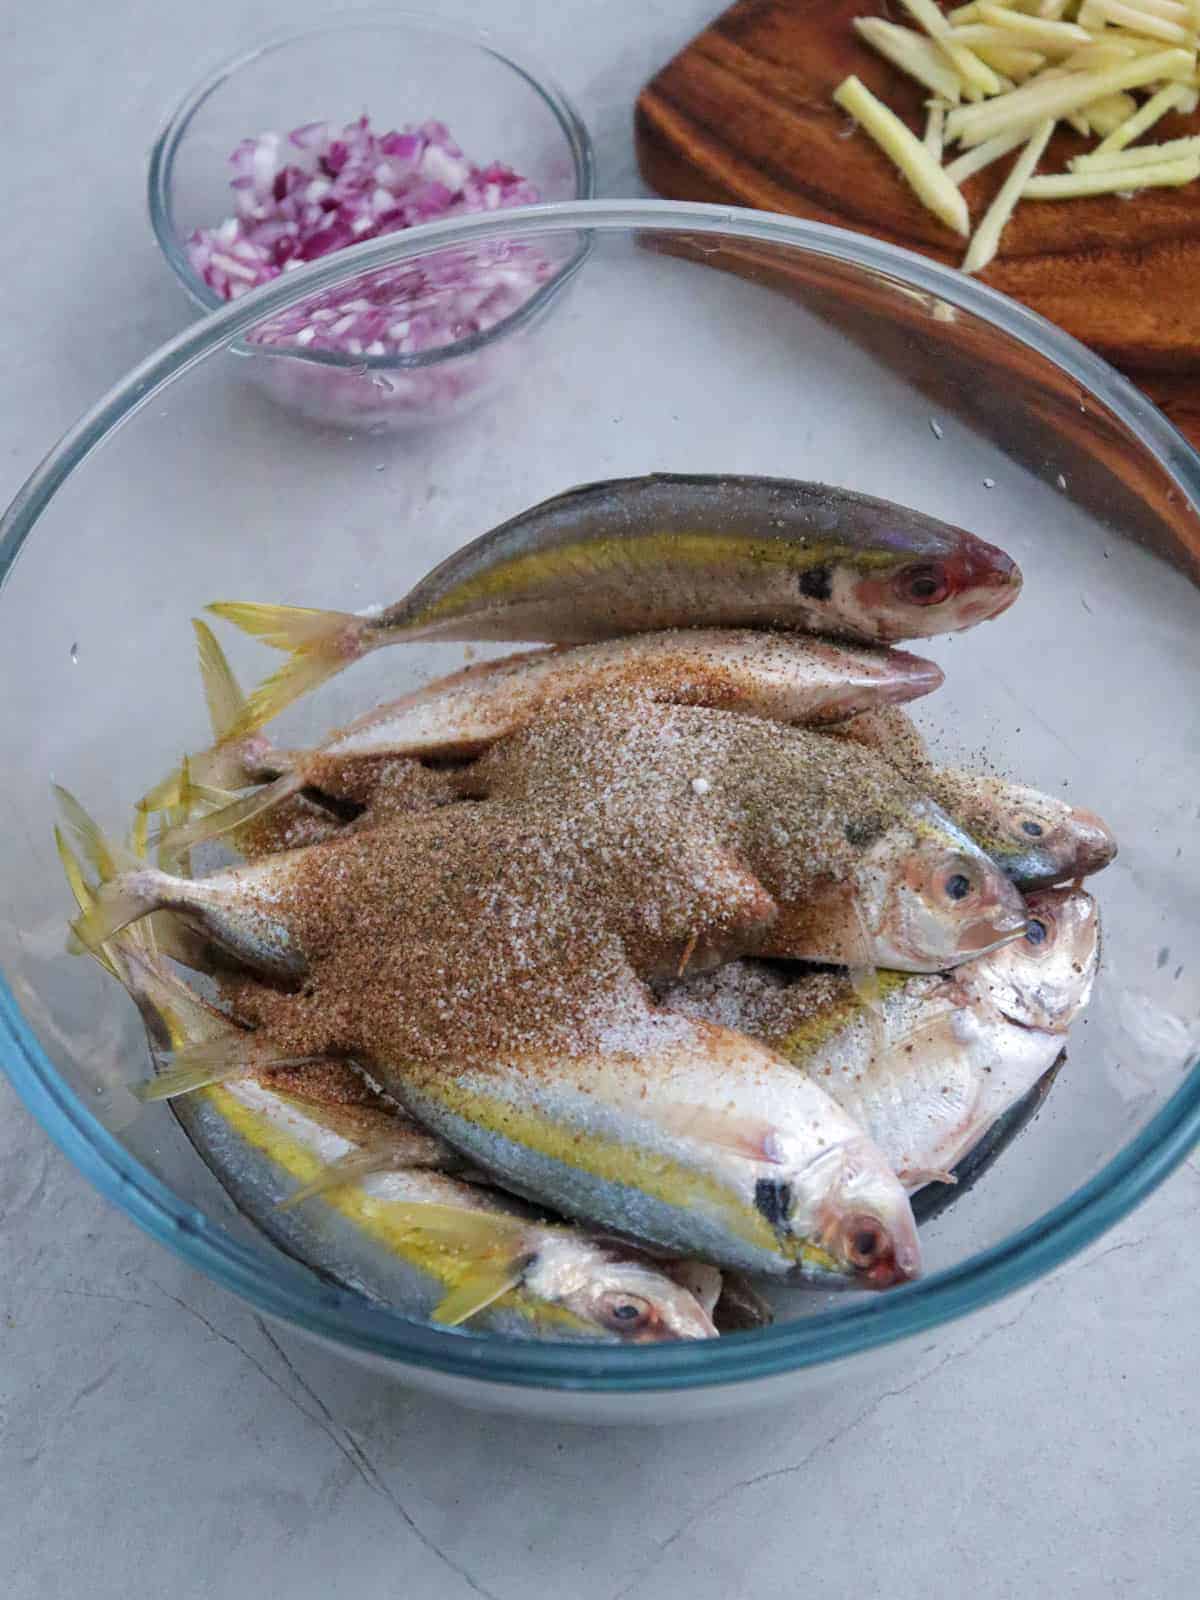 seasoning yellowtail scad with tamarind powder in a clear bowl